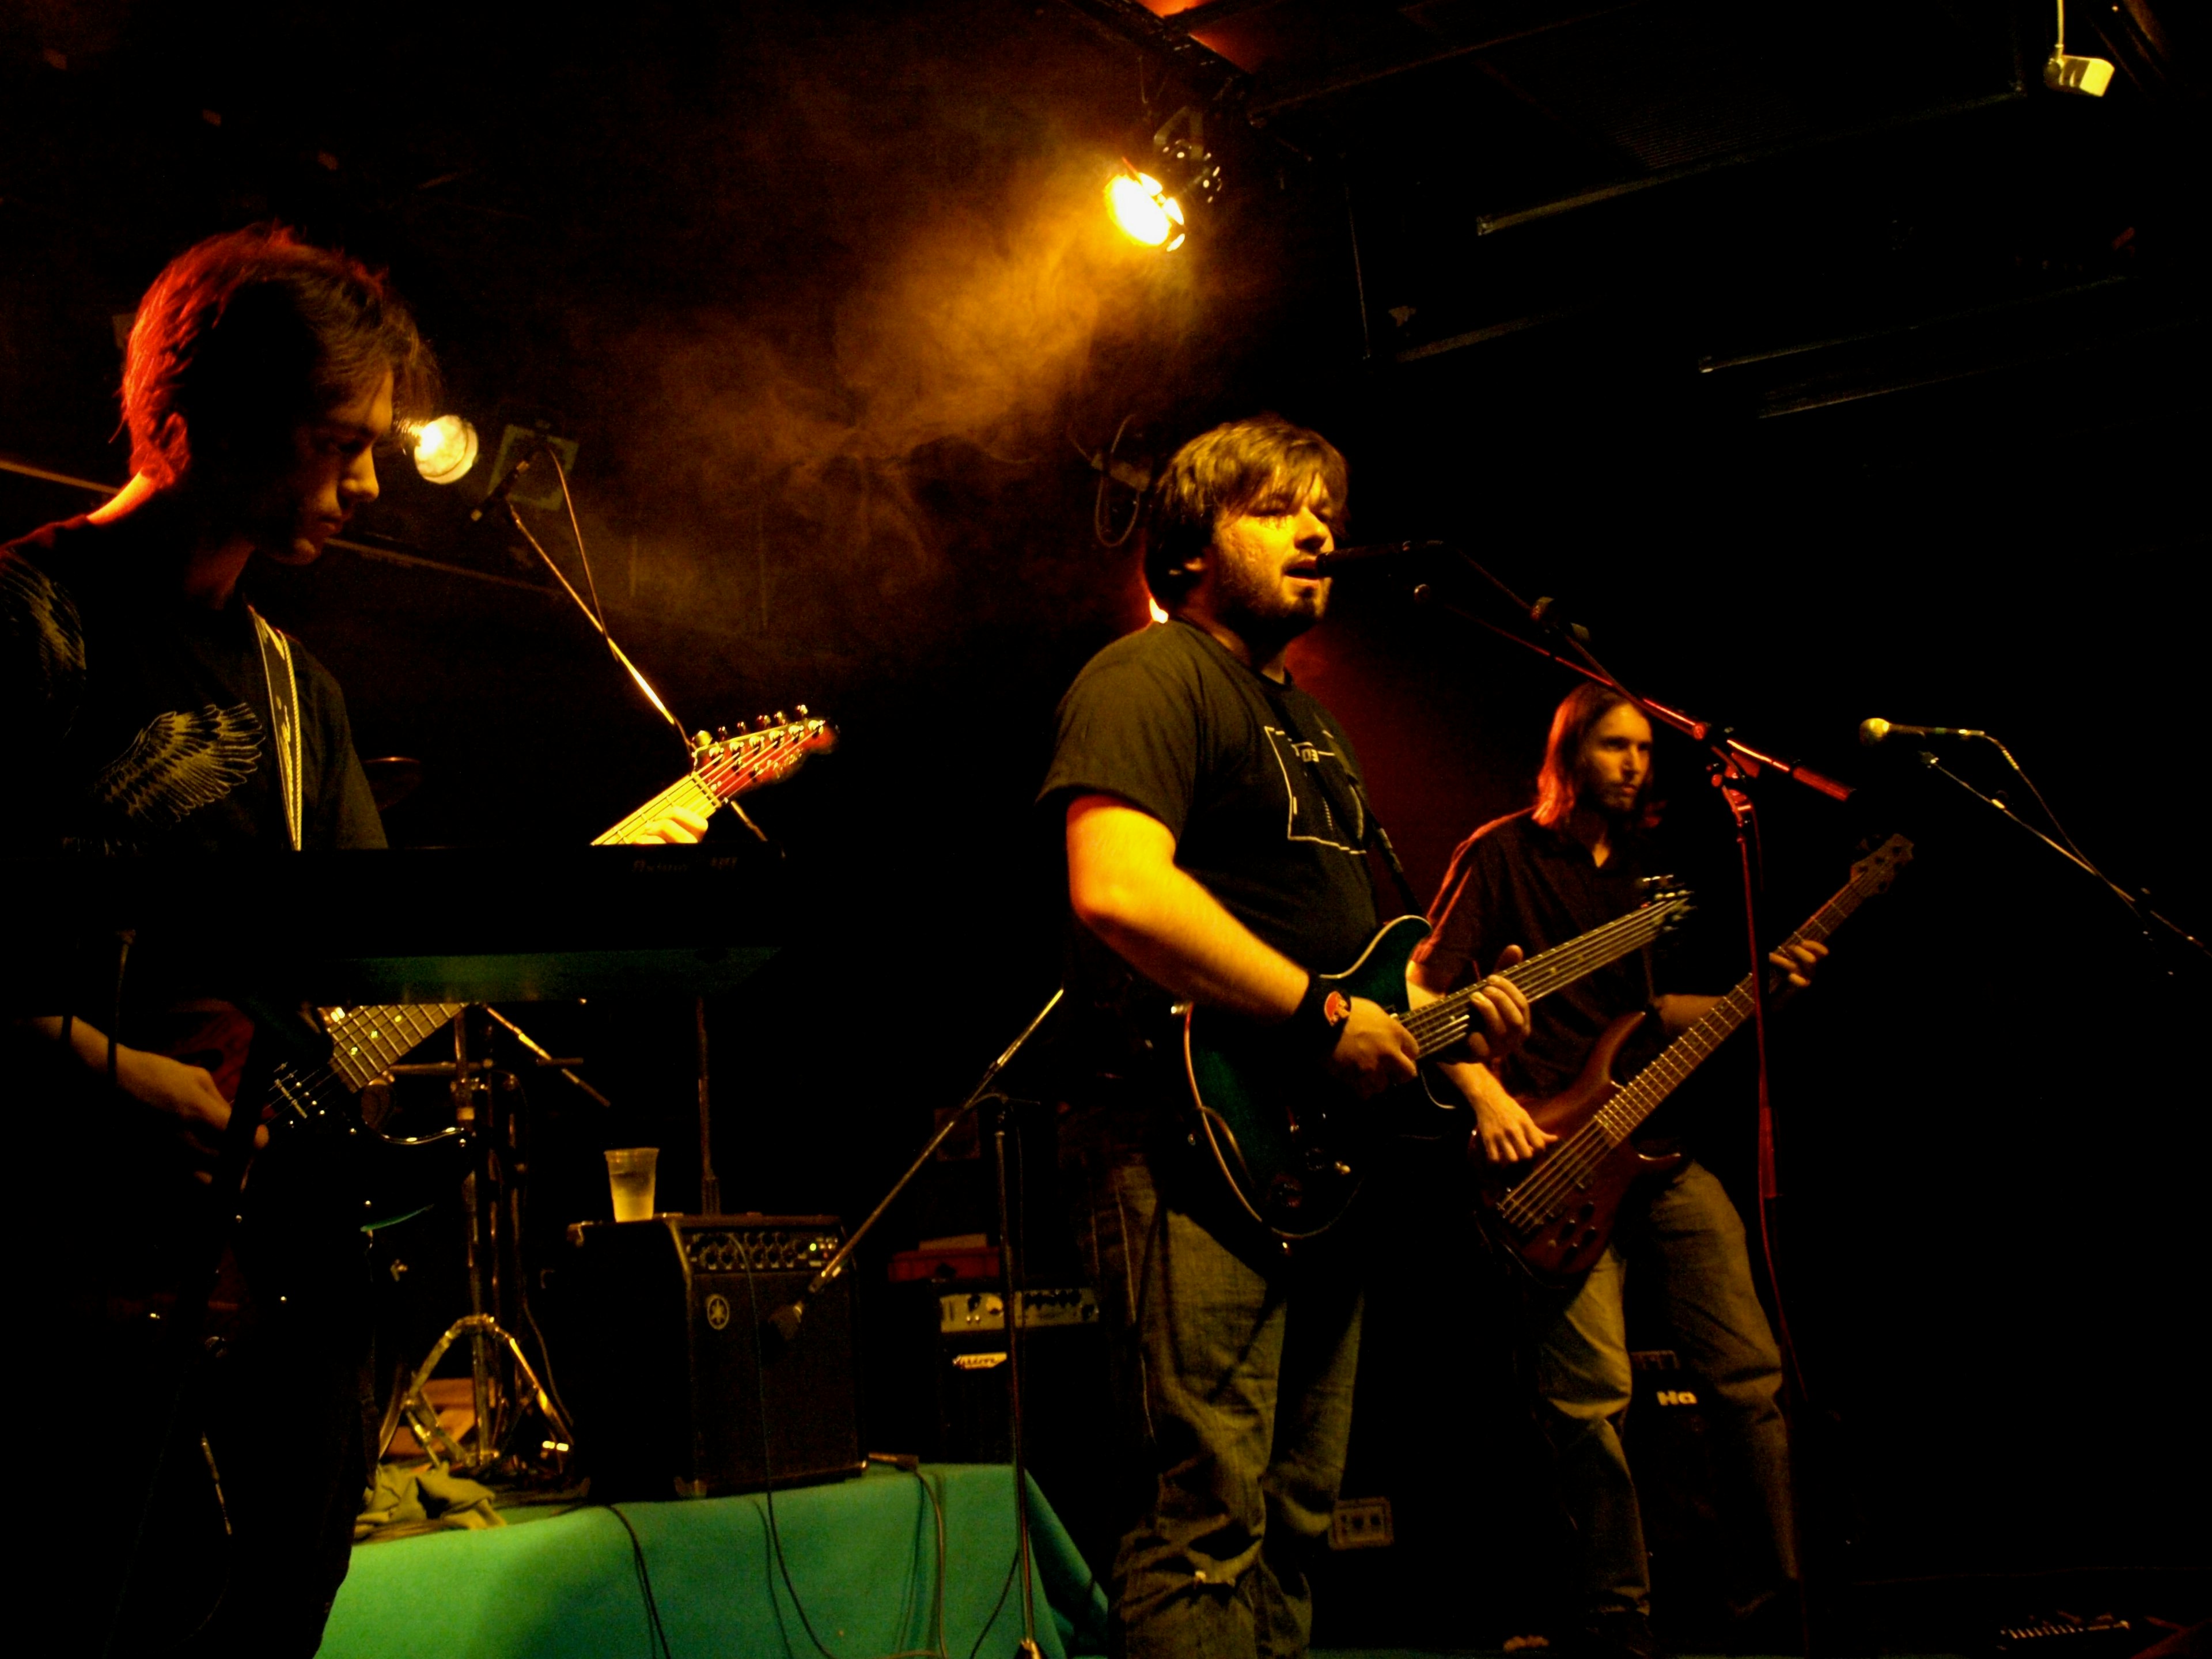 Two Clouds Away (Clodéric's band at University) playing live on stage